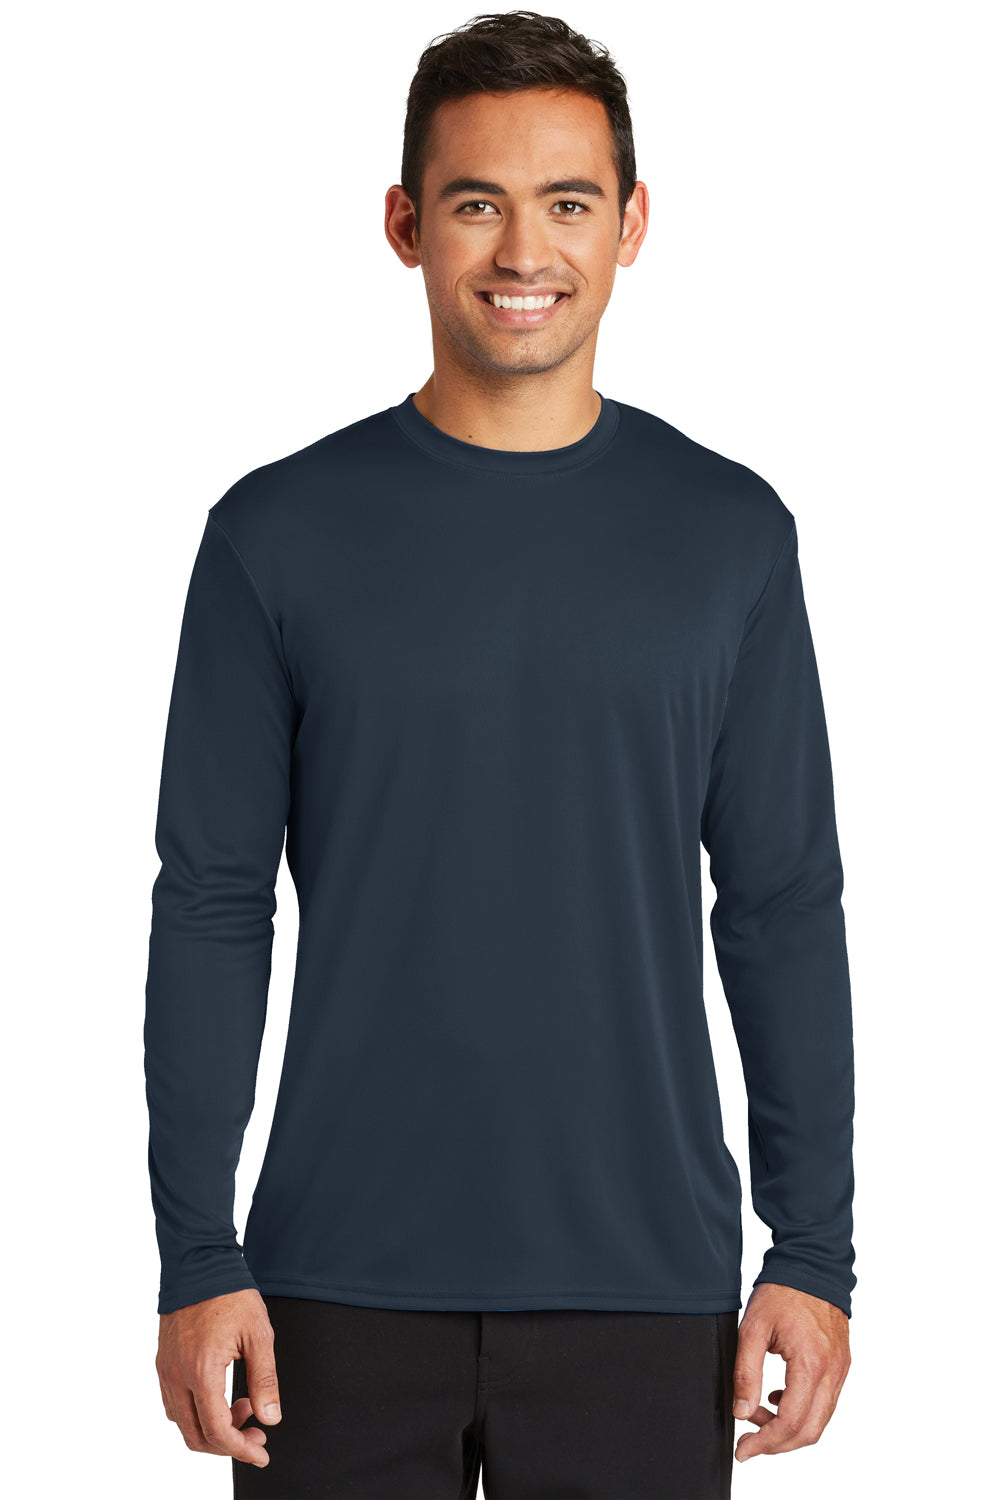 Port & Company PC380LS Mens Dry Zone Performance Moisture Wicking Long Sleeve Crewneck T-Shirt Navy Blue Front